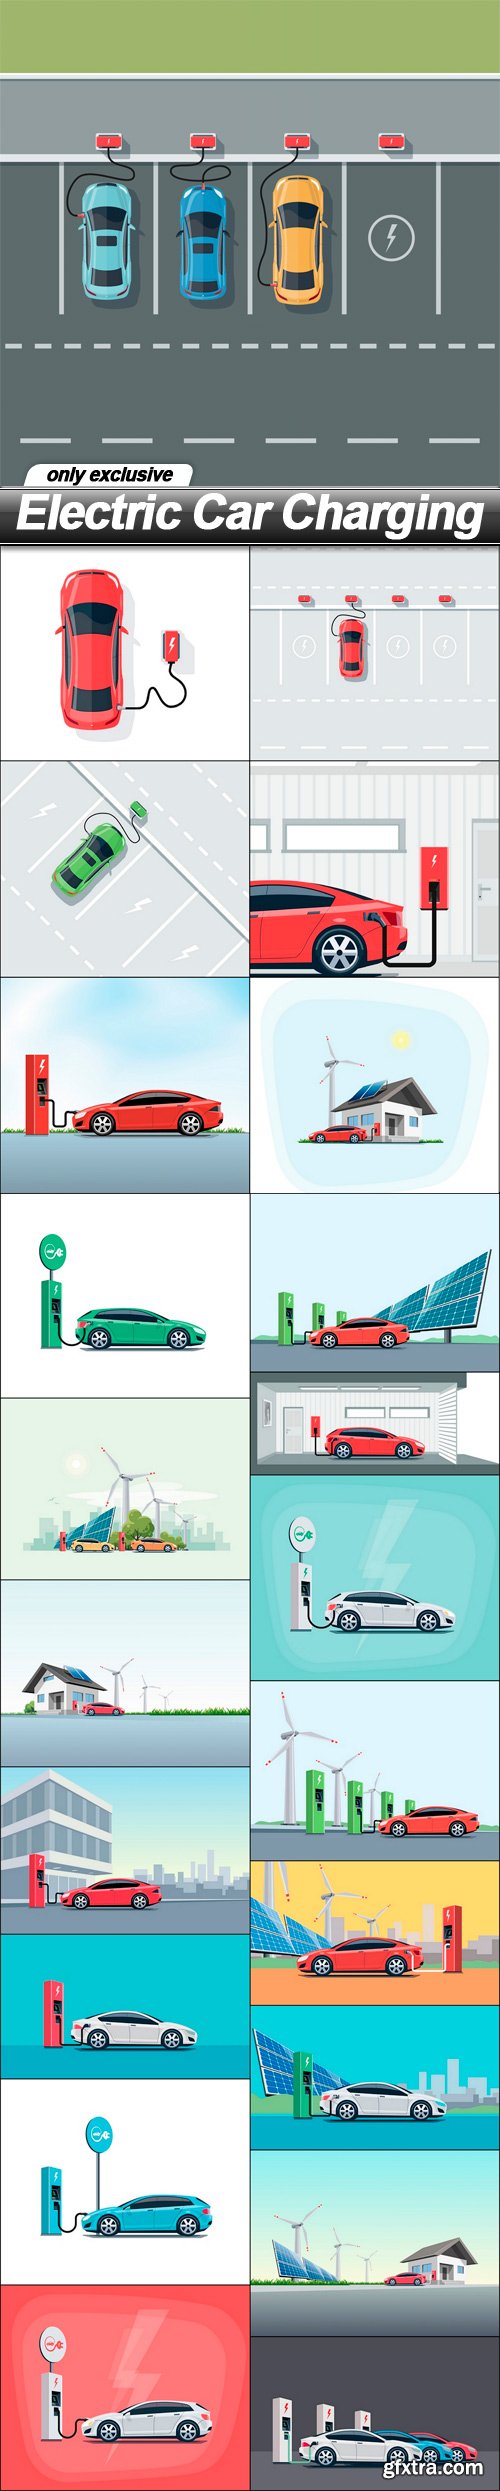 Electric Car Charging - 22 EPS